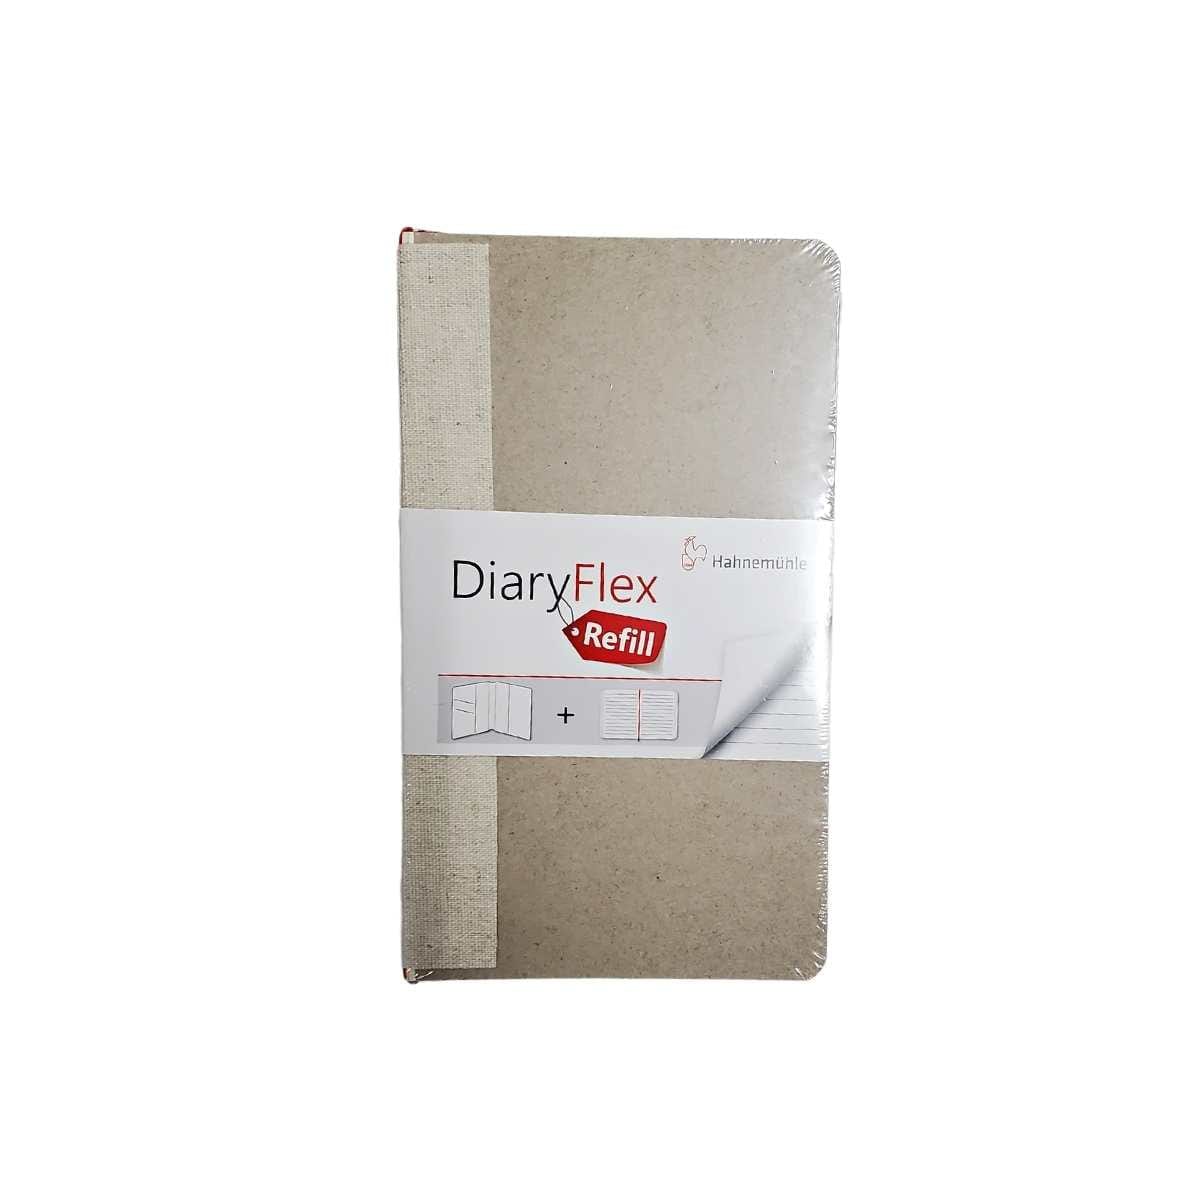 Hahnemühle Notebook - Lined Hahnemühle - DiaryFlex Notebook Refill - Ruled - Item #10628671